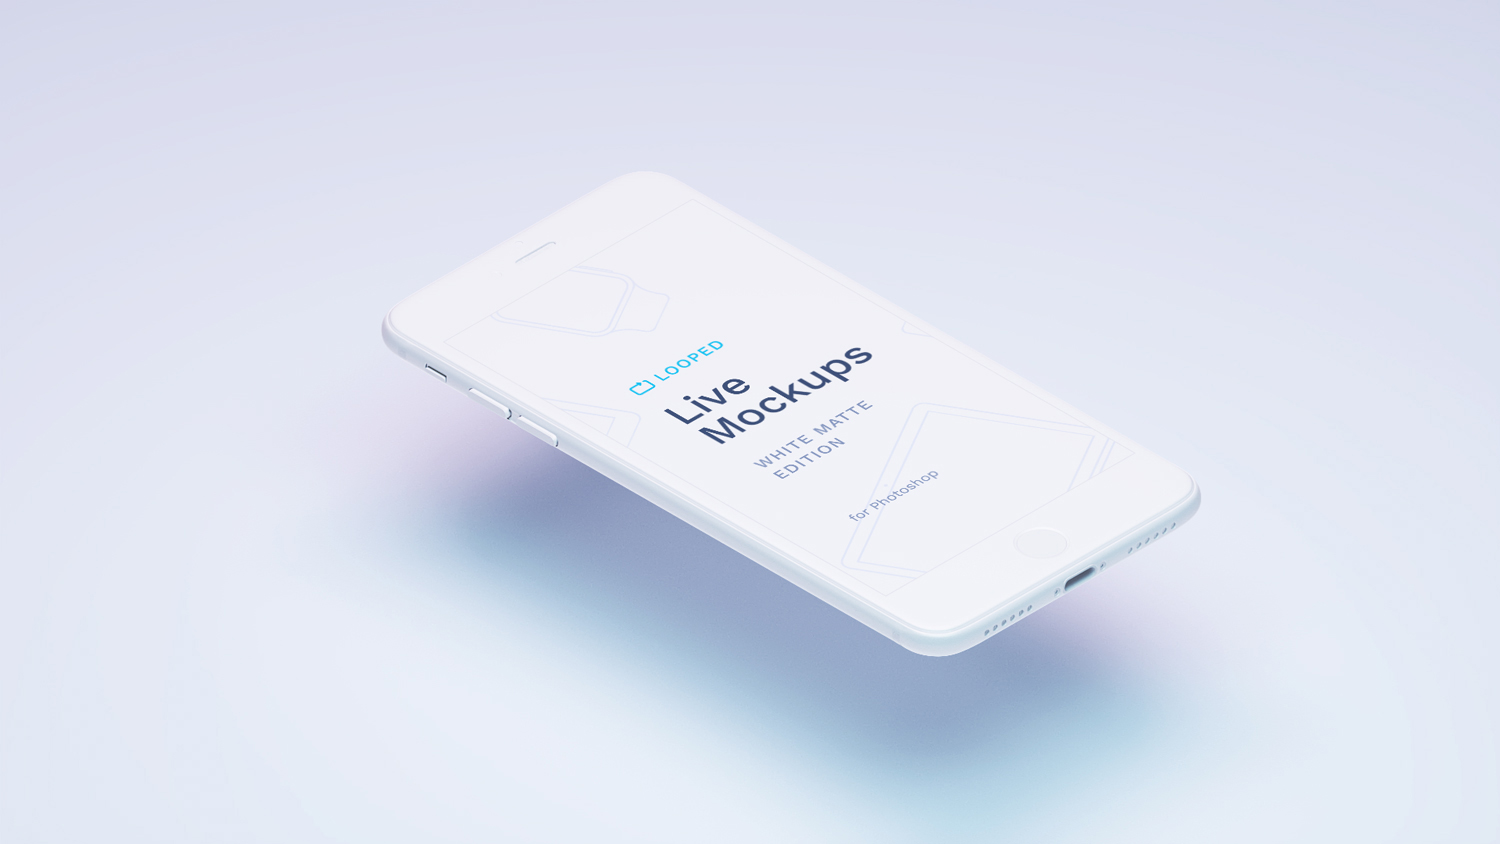 Iphone-Color-White-Matte-Apple-Devices-Mockup